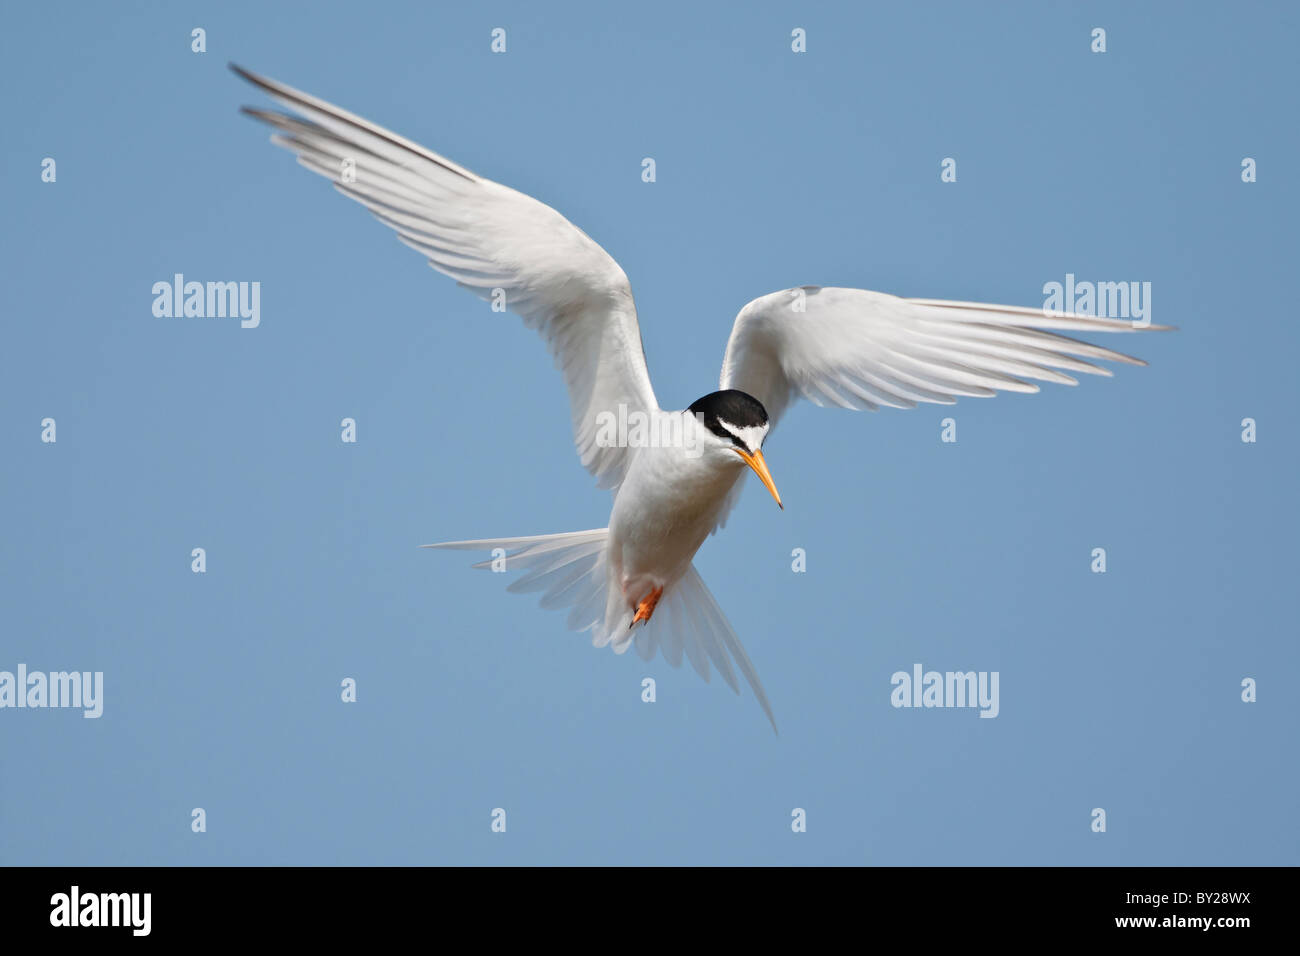 Little tern hovers against a clear blue sky. Stock Photo